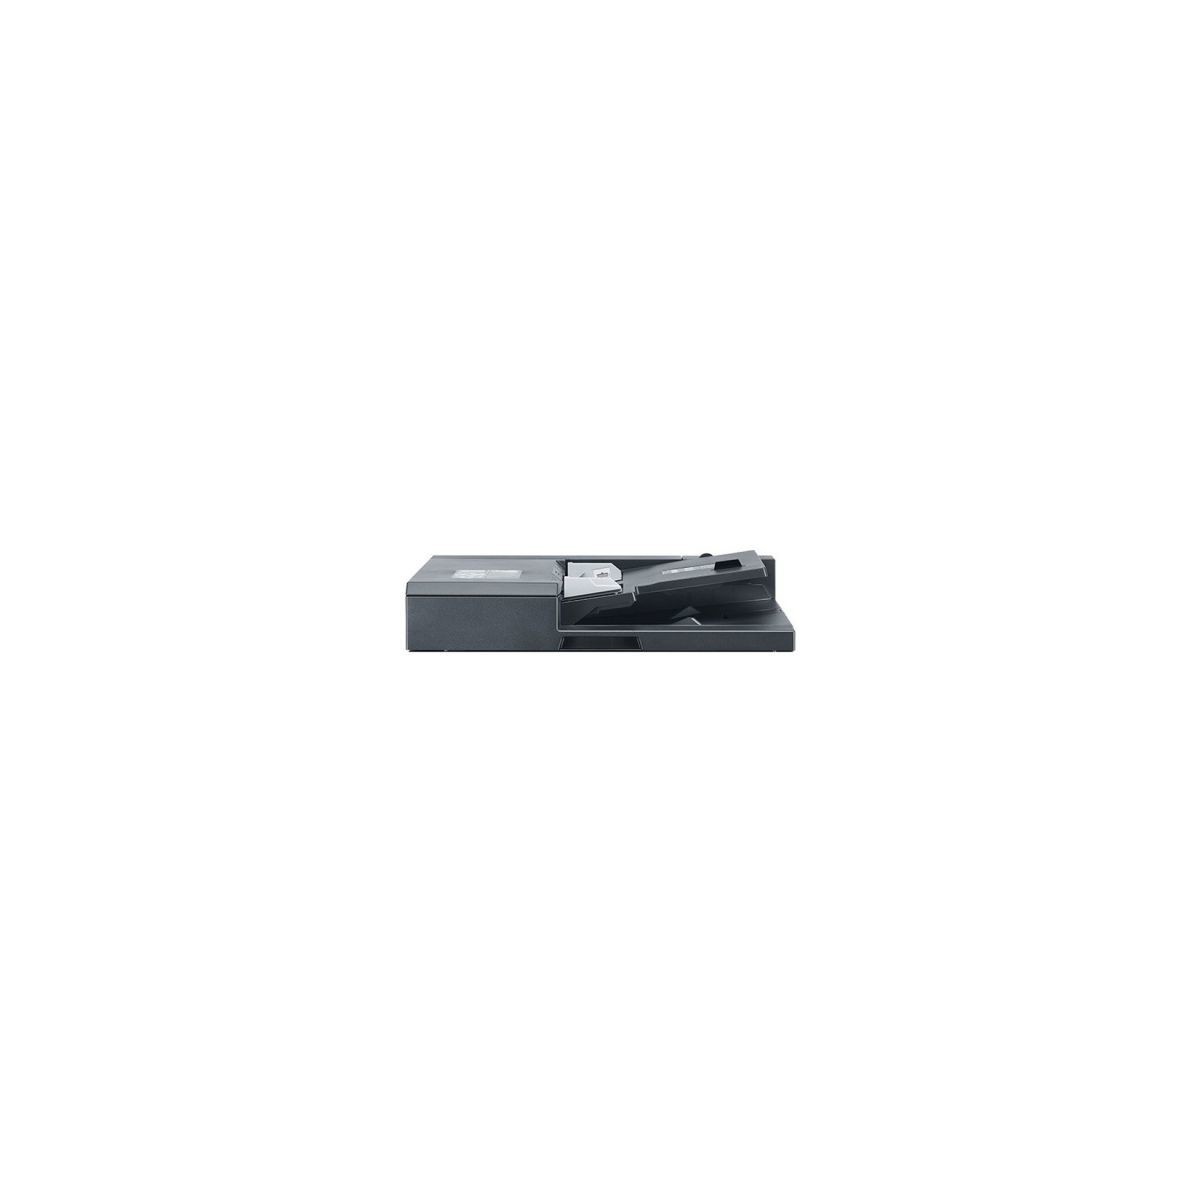 Kyocera DP-480 - Kyocera TASKalfa 1800 - TASKalfa 2200 - TASKalfa 1801 - TASKalfa 2201 - 50 sheets - 563 mm - 439 mm - 128 mm